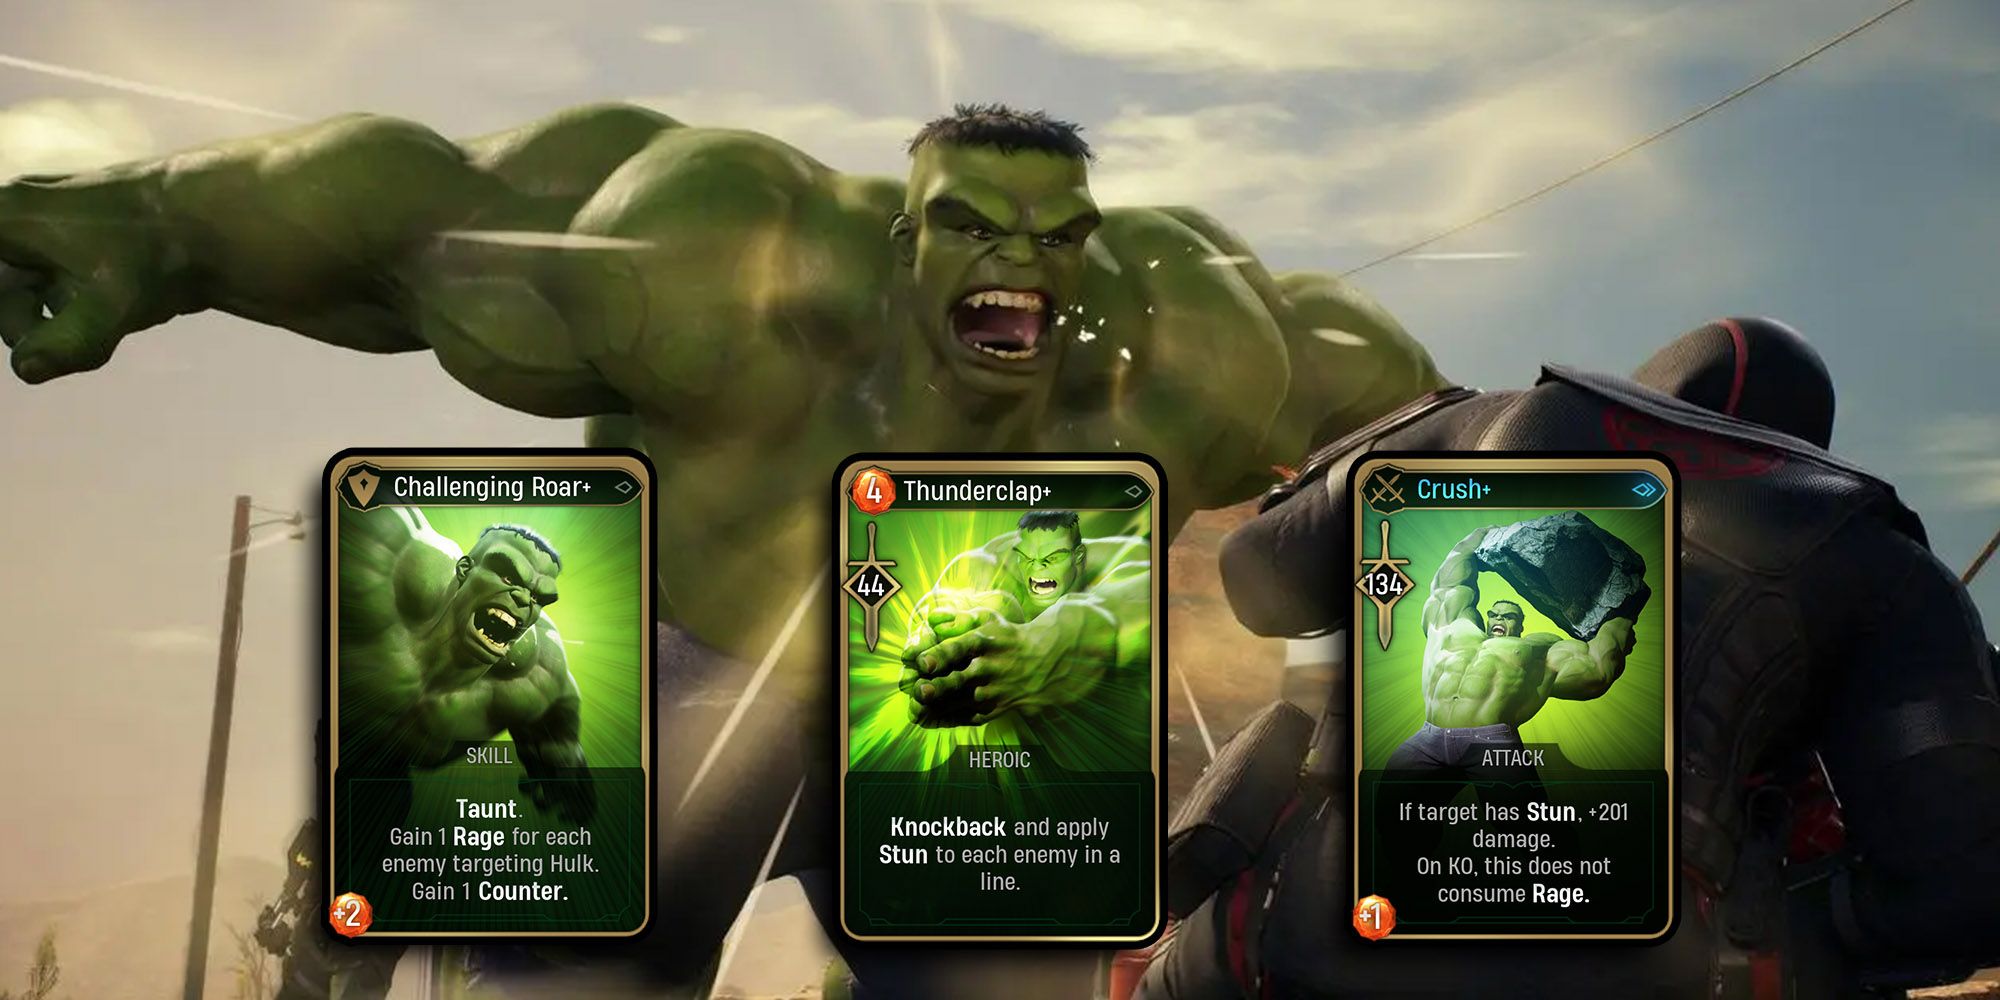 Marvel Midnight Suns - Hulk's Best Card Upgrades Over Image Of Hulk In-Game Roaring Angrily